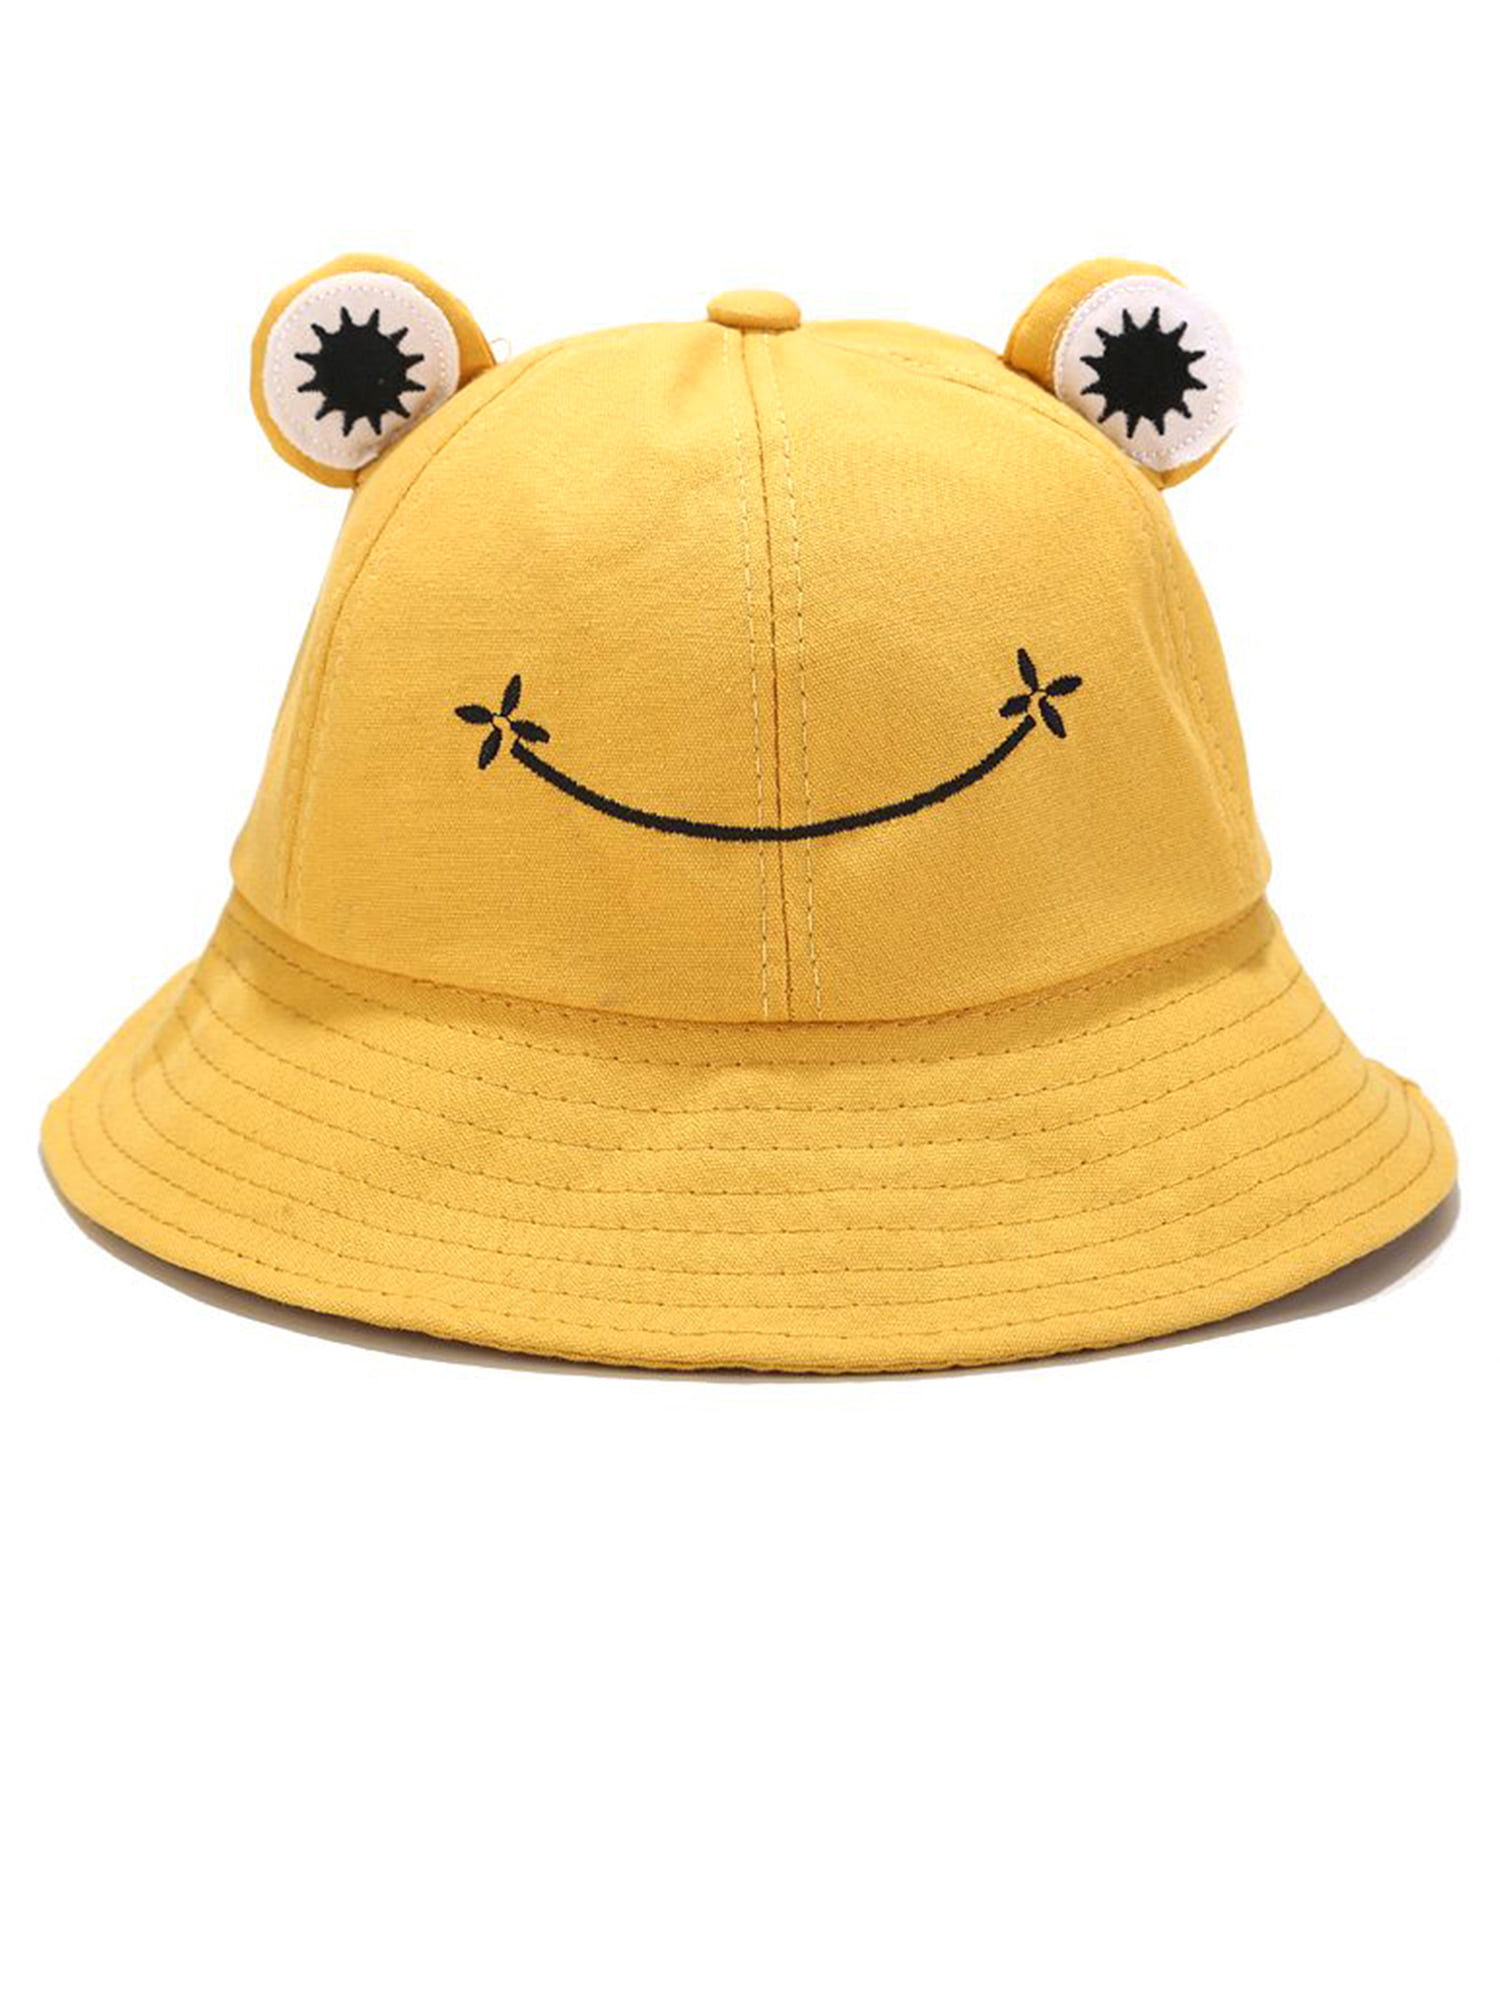 Teens Cute Drawn Teddy Bear Flowers New Summer Unisex Cotton Fashion Fishing Sun Bucket Hats for Kid Women and Men with Customize Top Packable Fisherman Cap for Outdoor Travel 